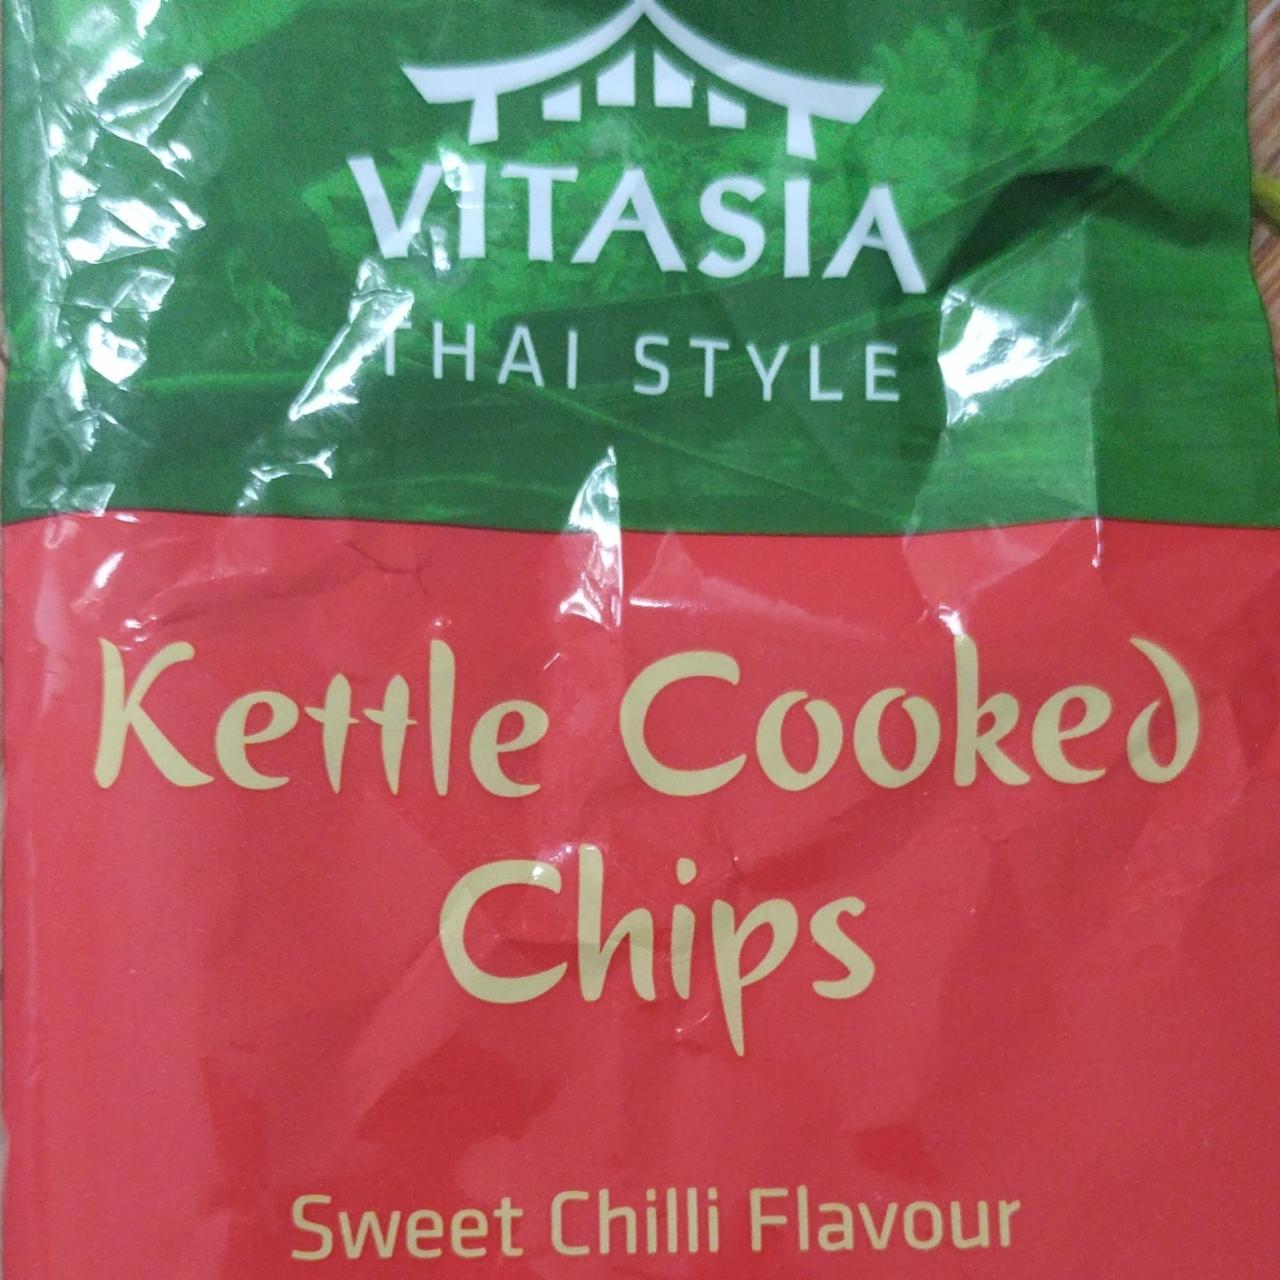 Fotografie - Kettler cooked chips sweet chilli flavour Vitasia Thai Style